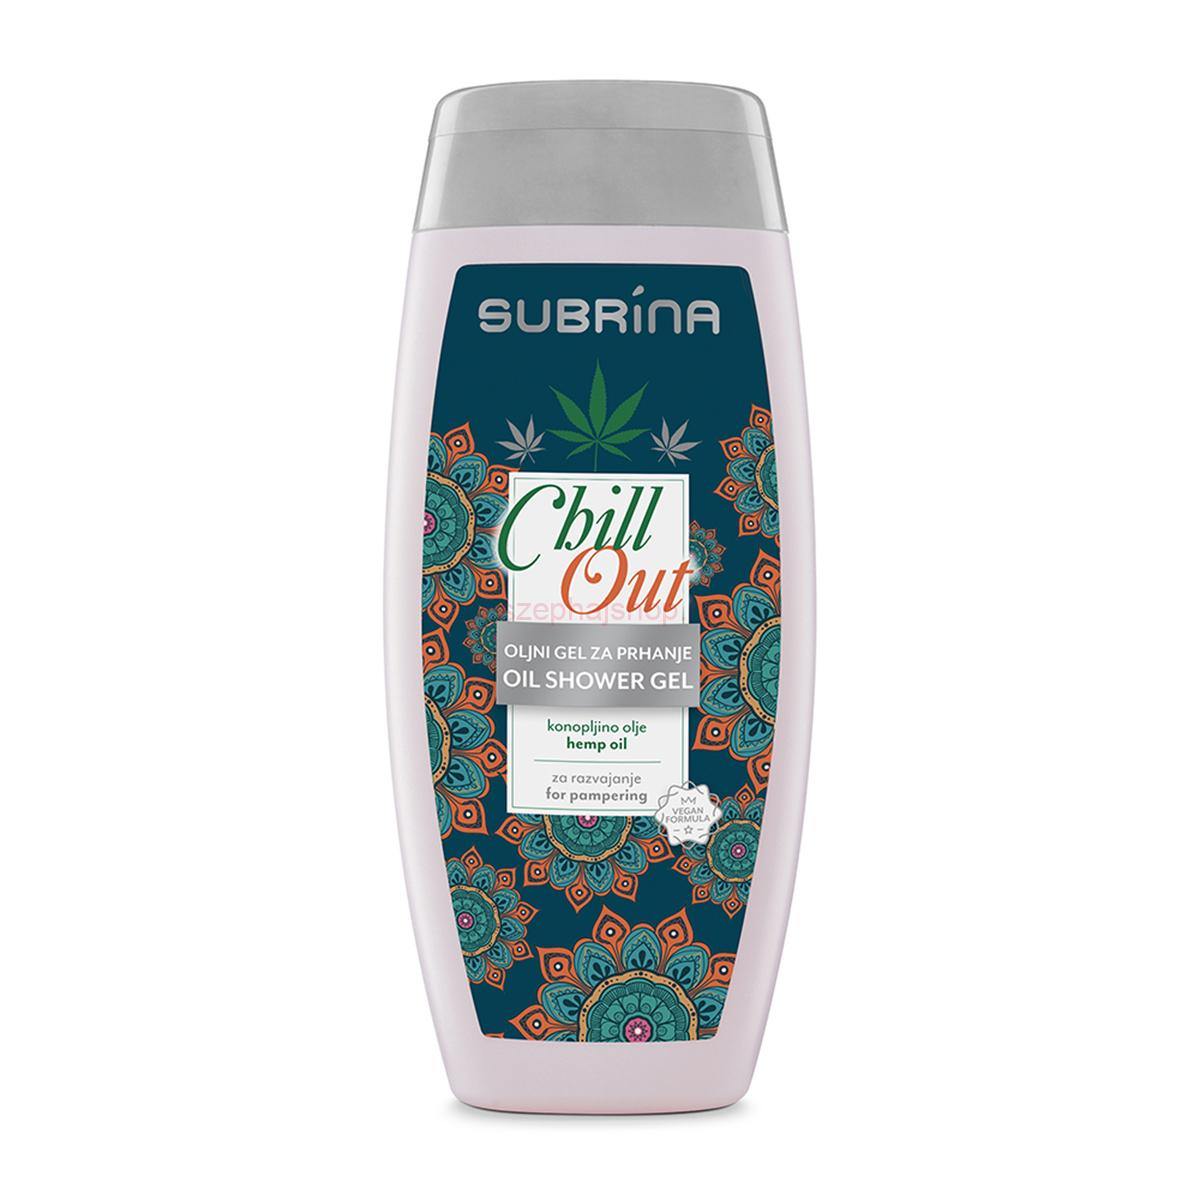 SUBRINA Chill Out tusfürdő kenderolajjal 250 ml